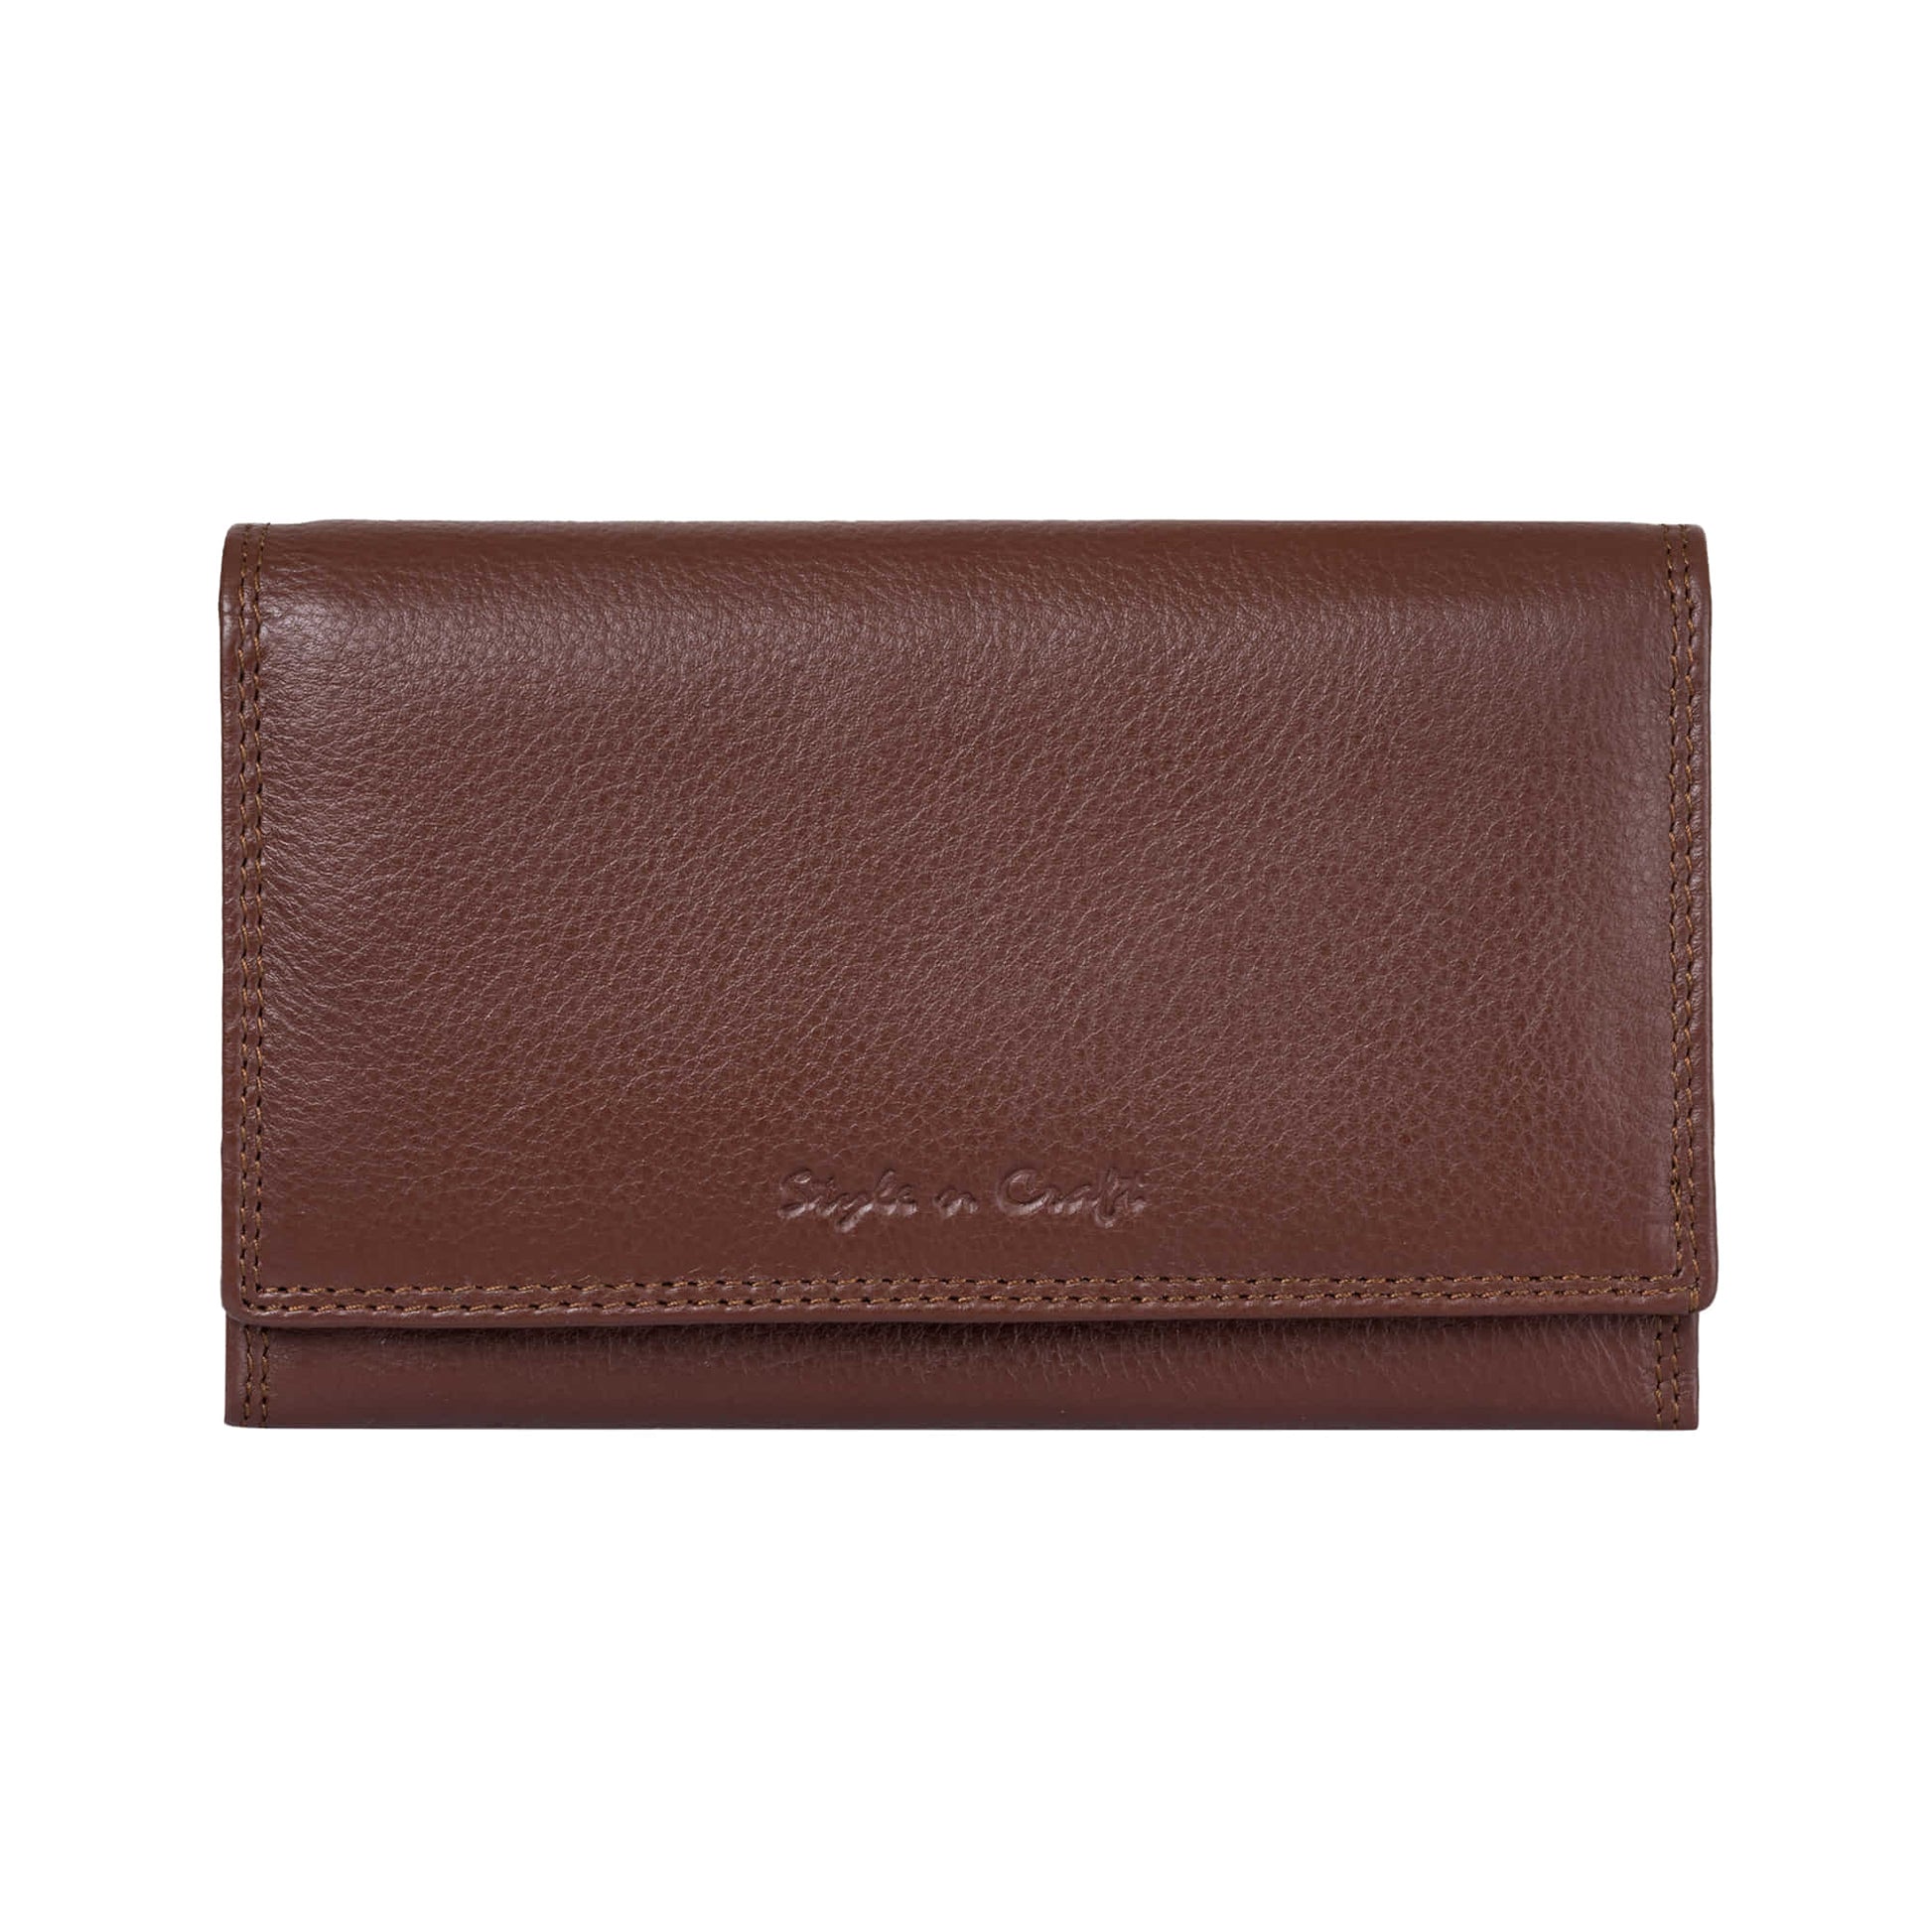 Style n Craft 391102 Ladies Clutch Wallet in Brown Full Grain Leather - Front View Closed